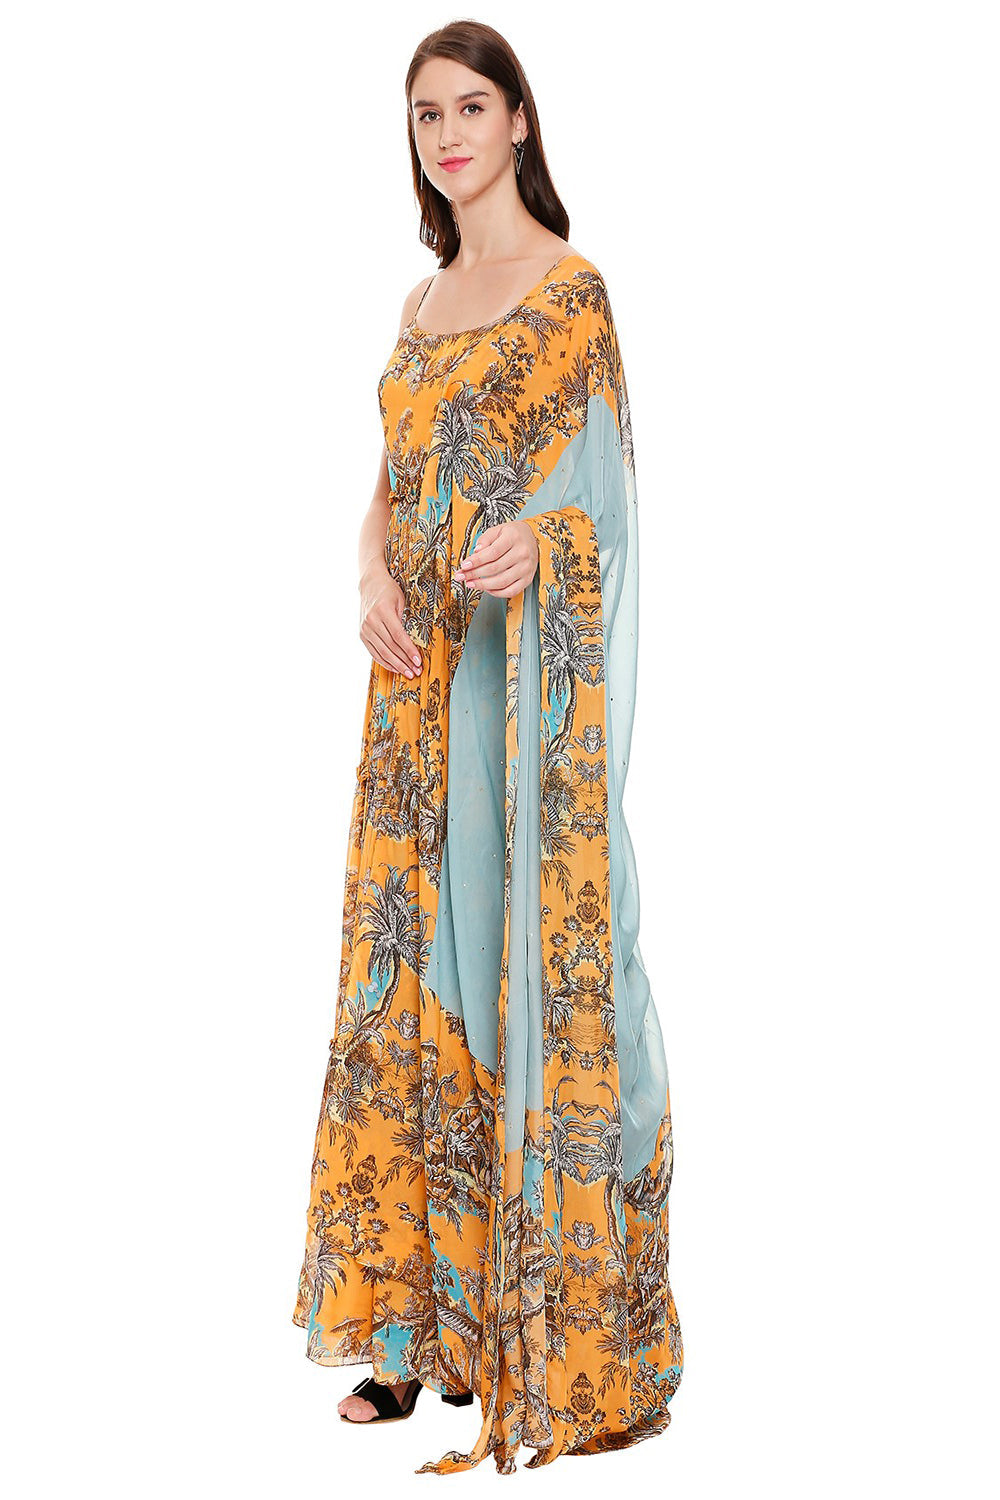 Printed Noodle Strap Long Dress With Dupatta